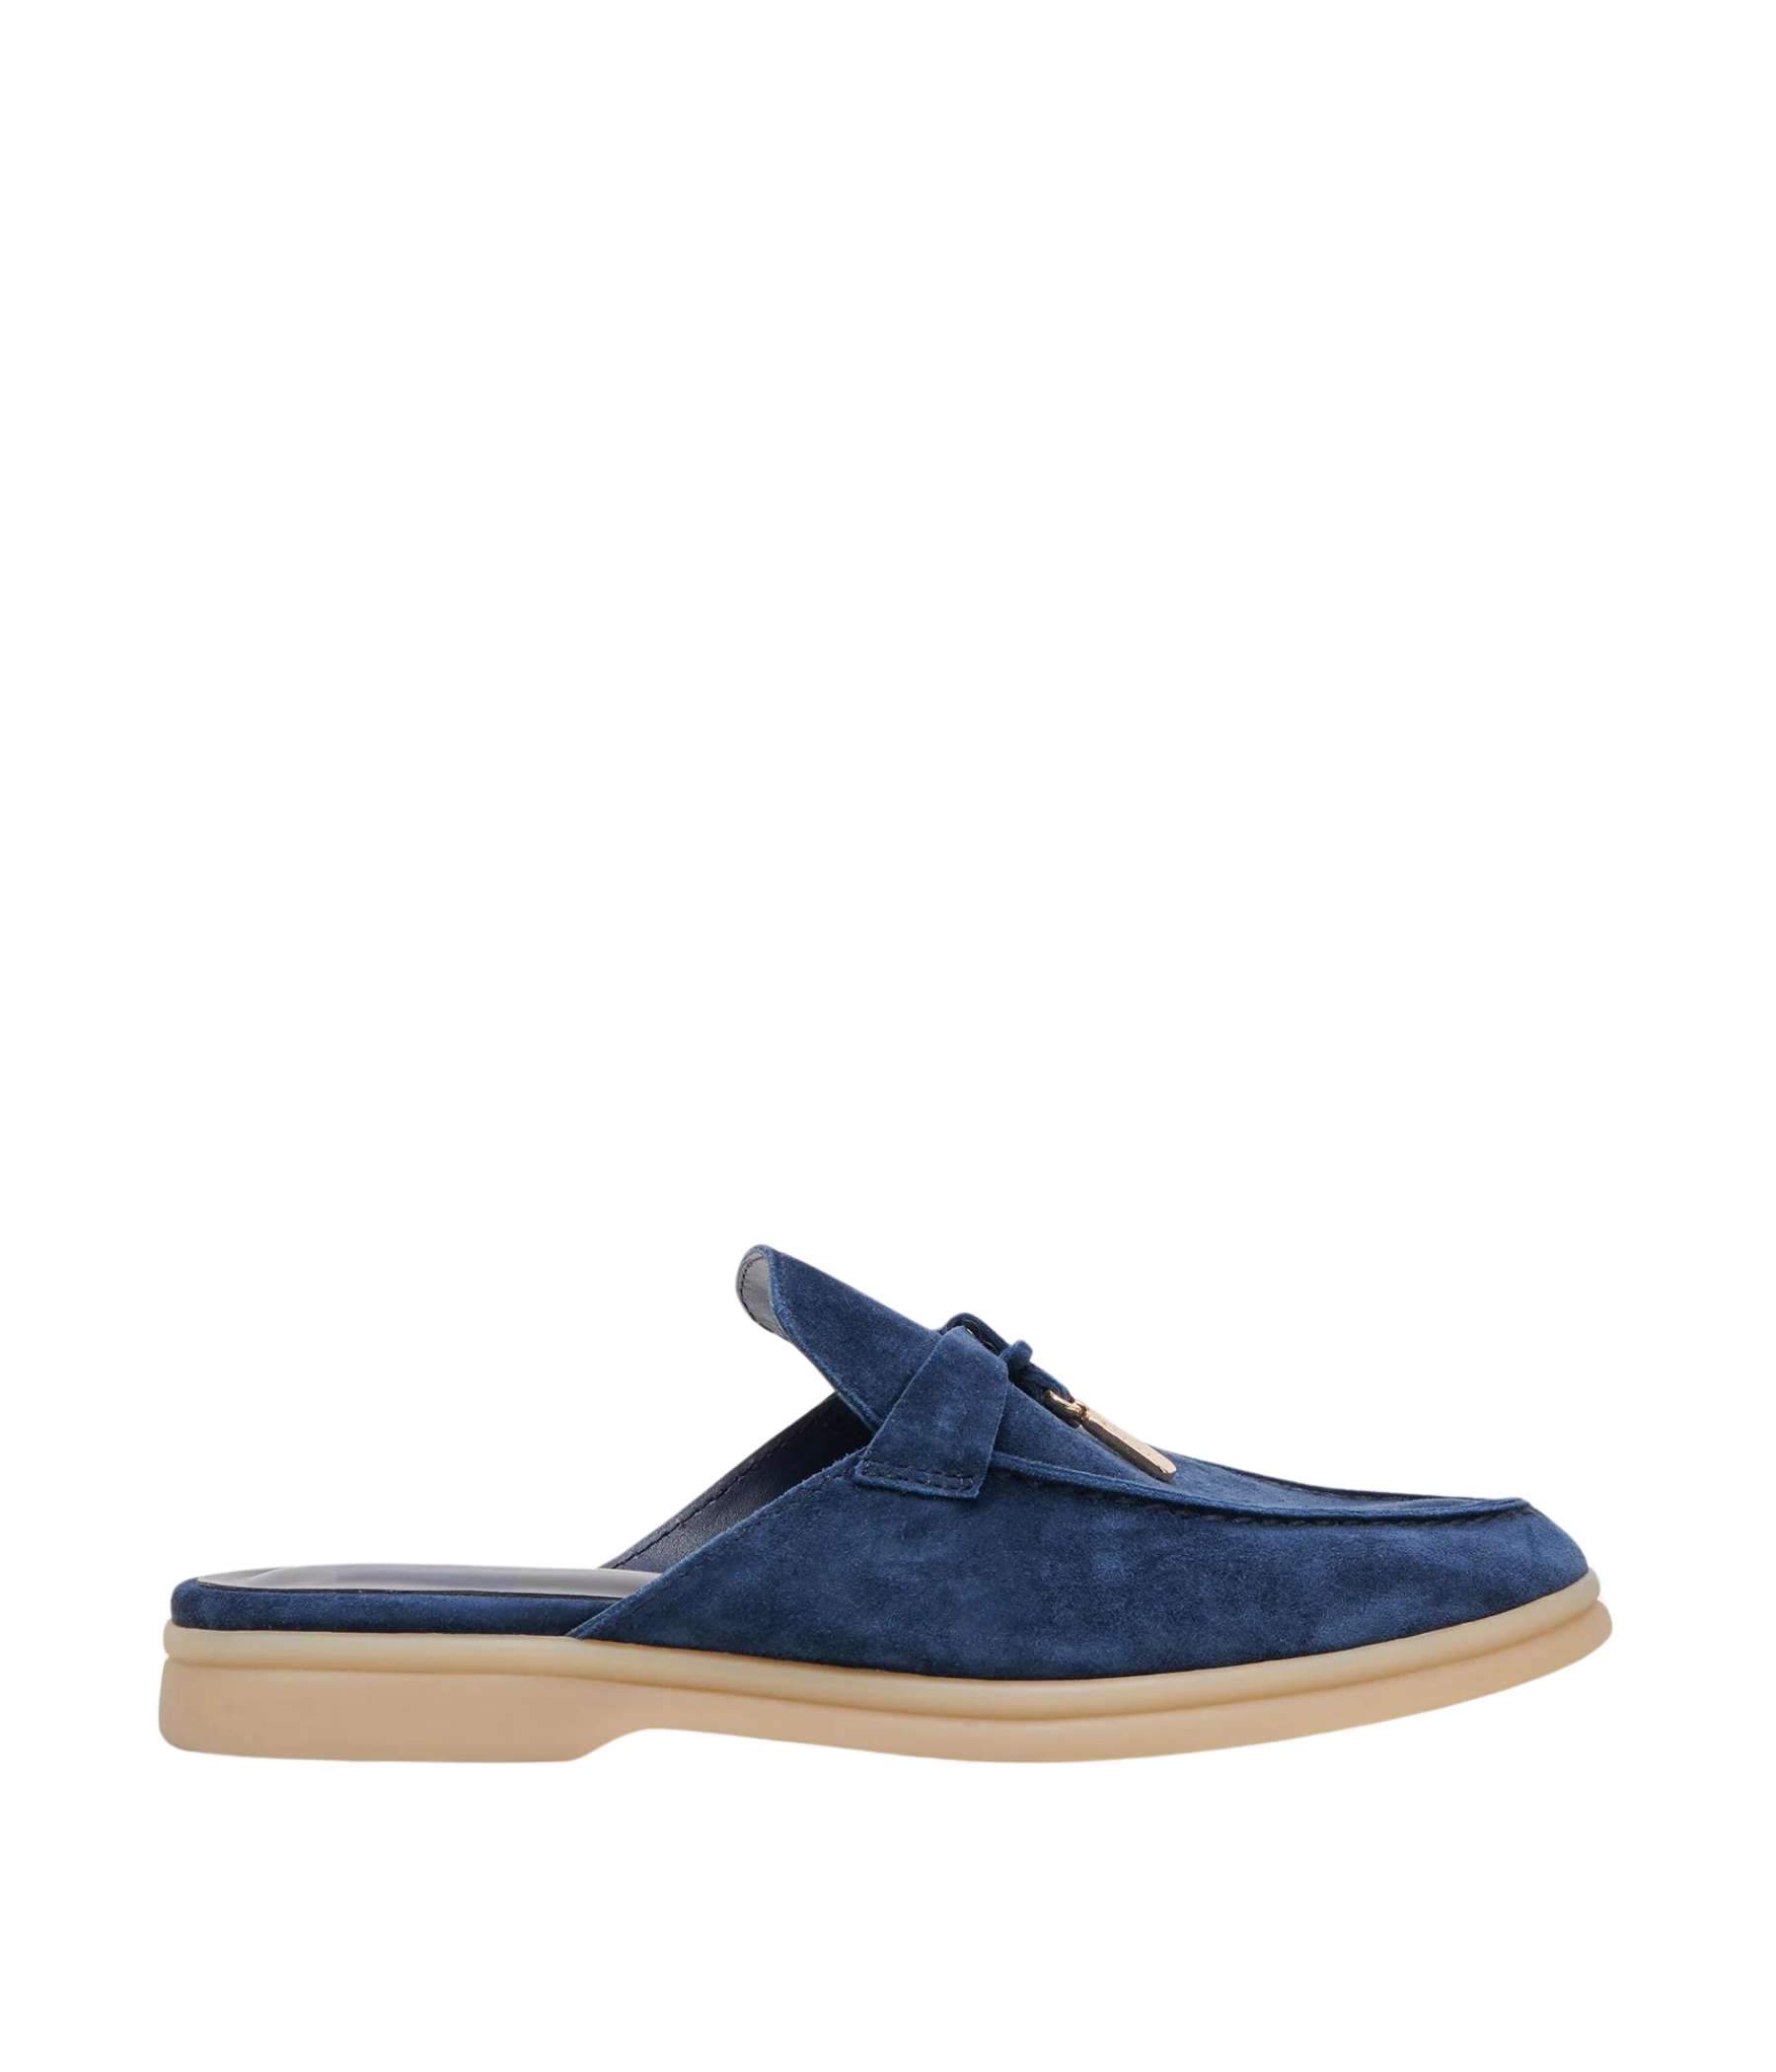 Lasail Flats in Navy Suede